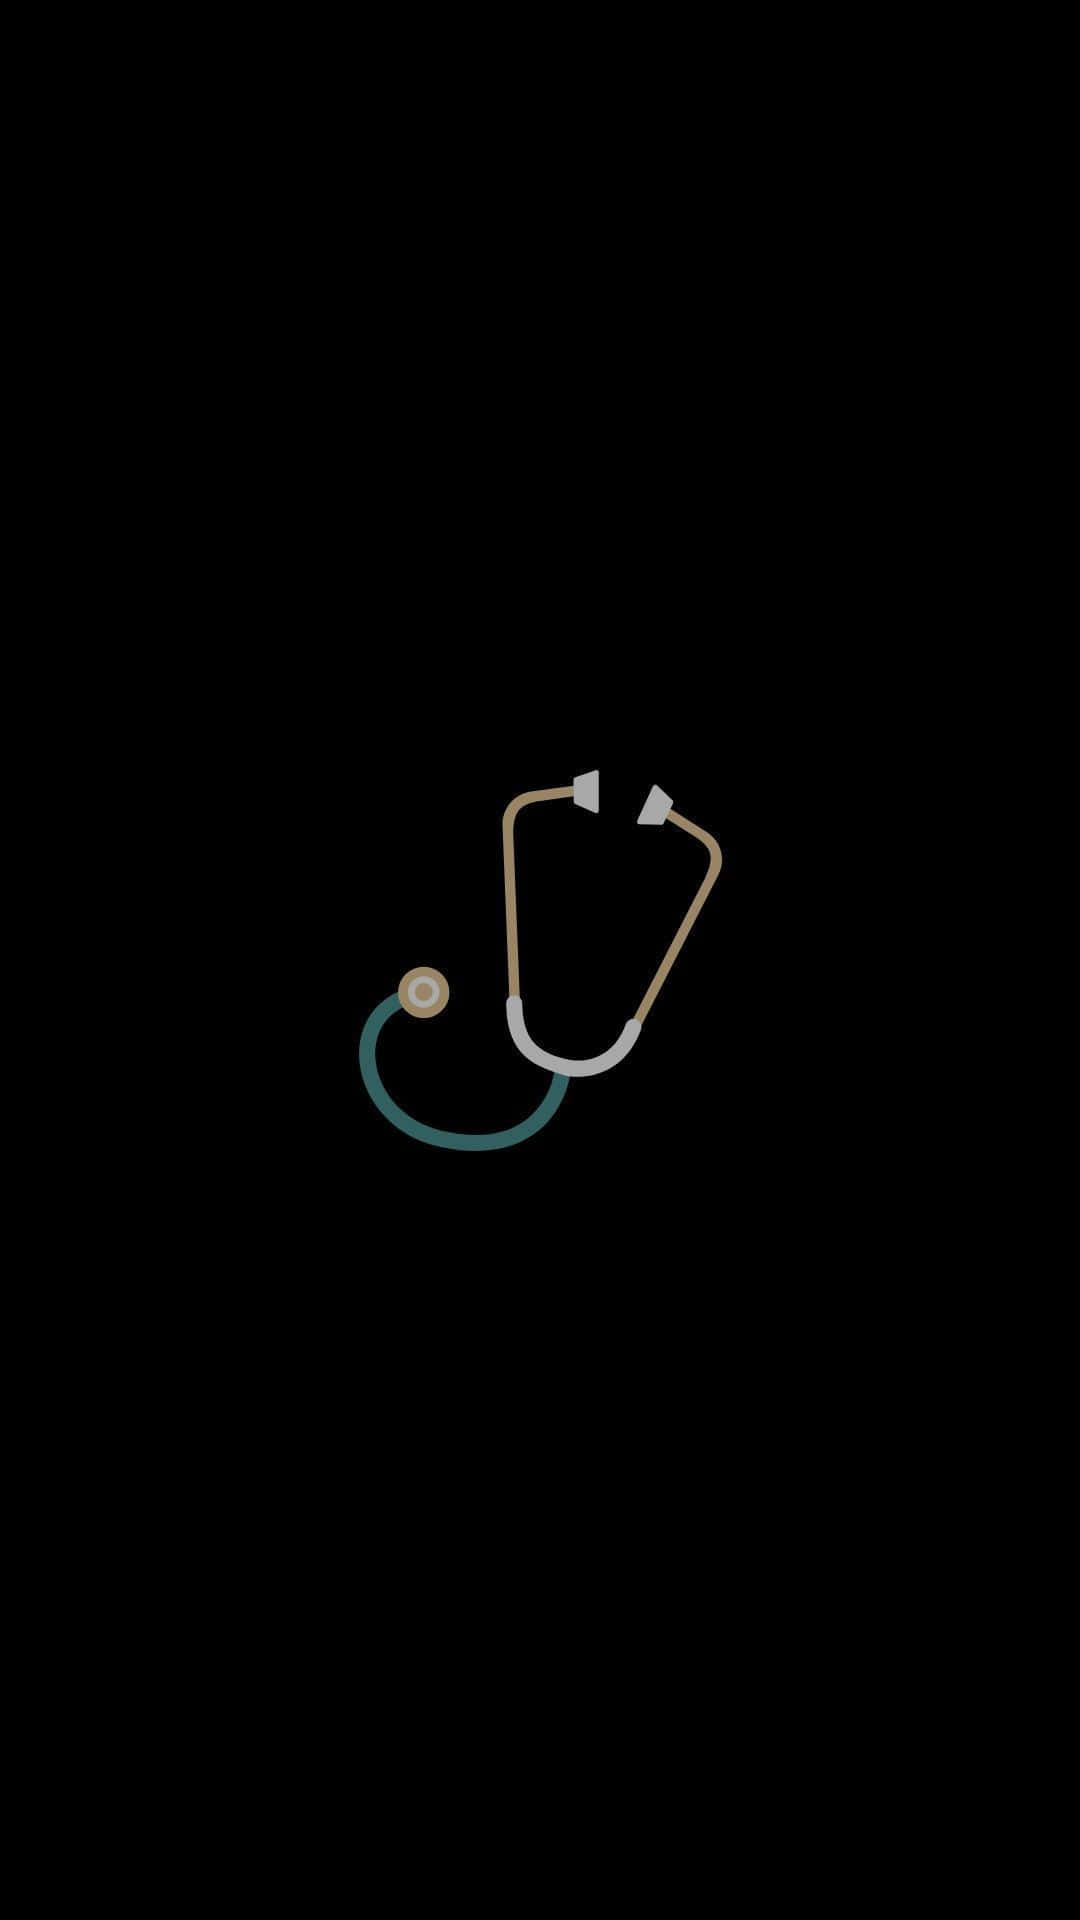 [400+] Medical Backgrounds | Wallpapers.com